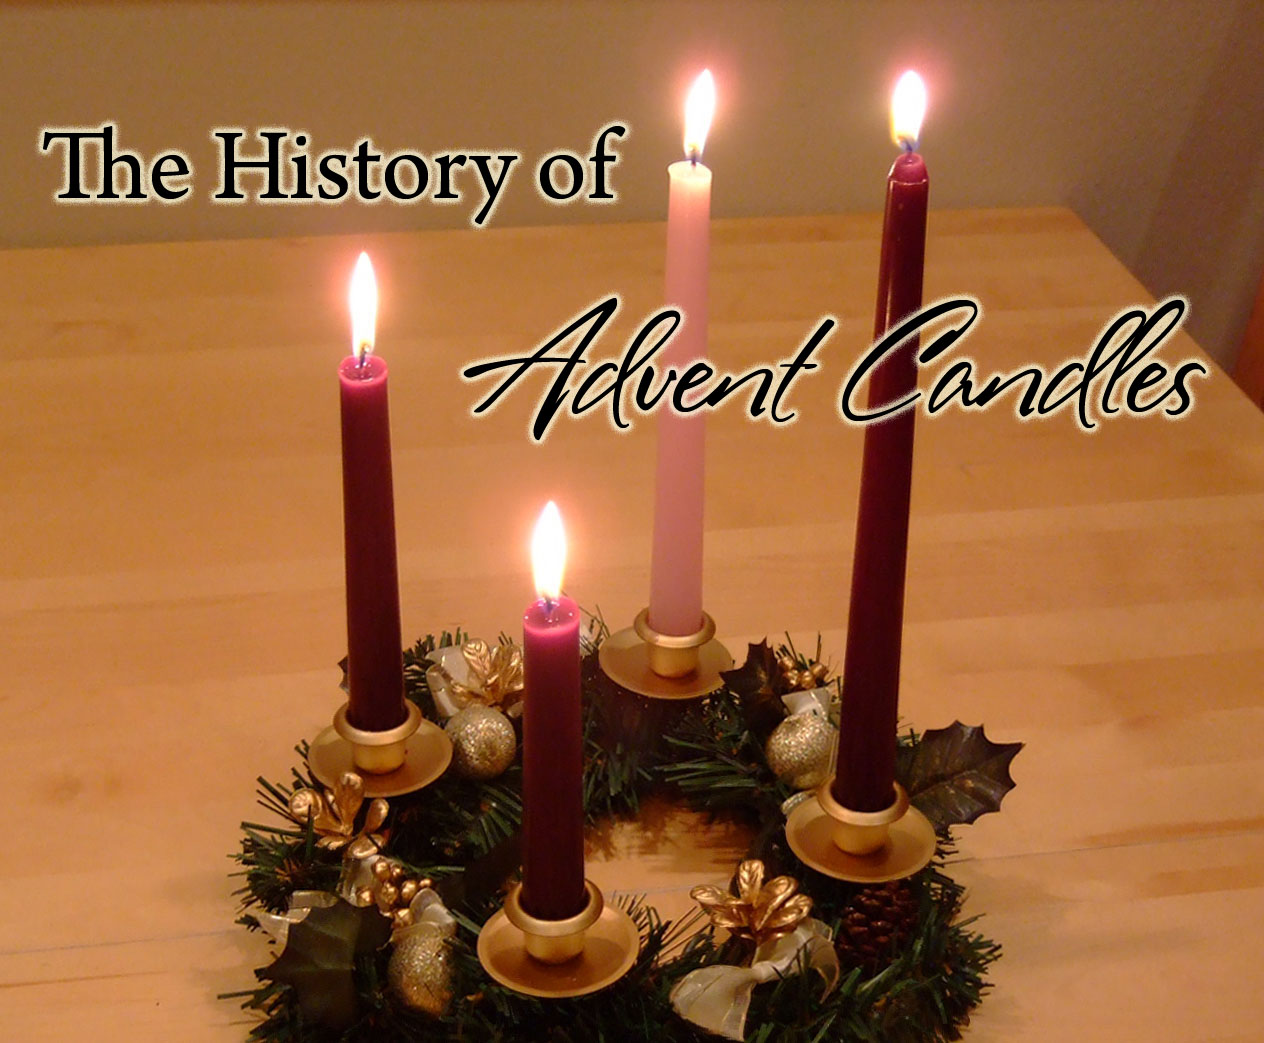 The History of Advent Candles